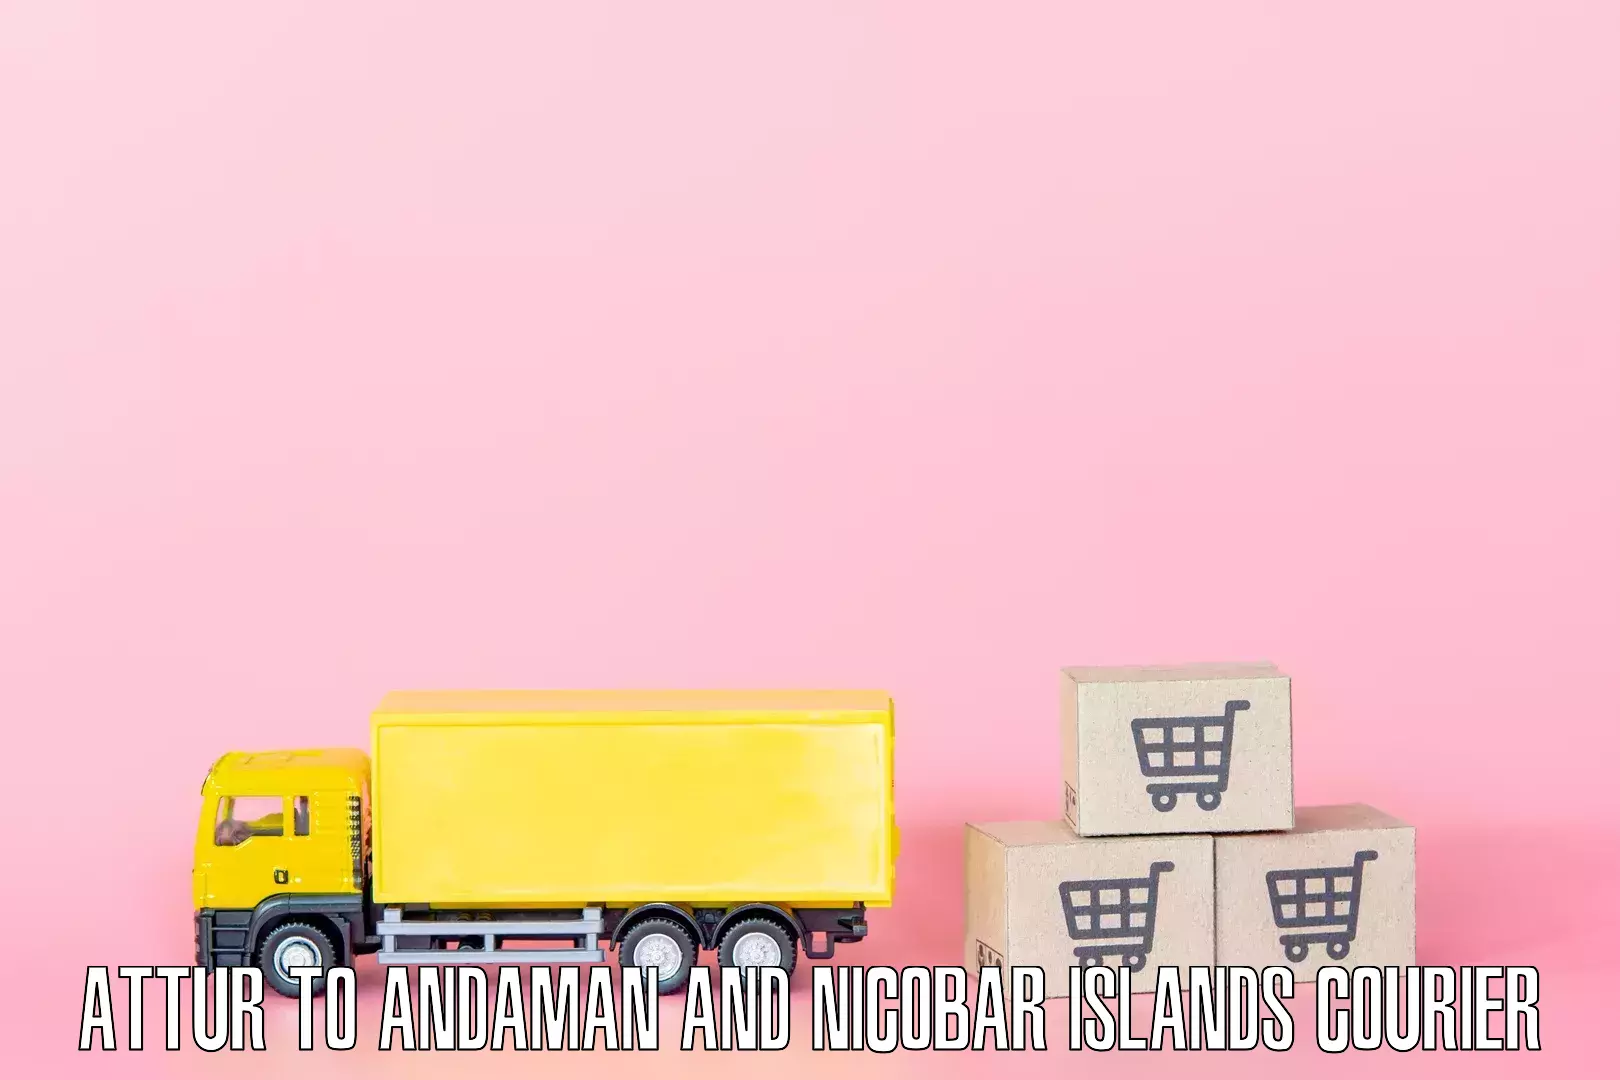 Furniture transport specialists Attur to Andaman and Nicobar Islands